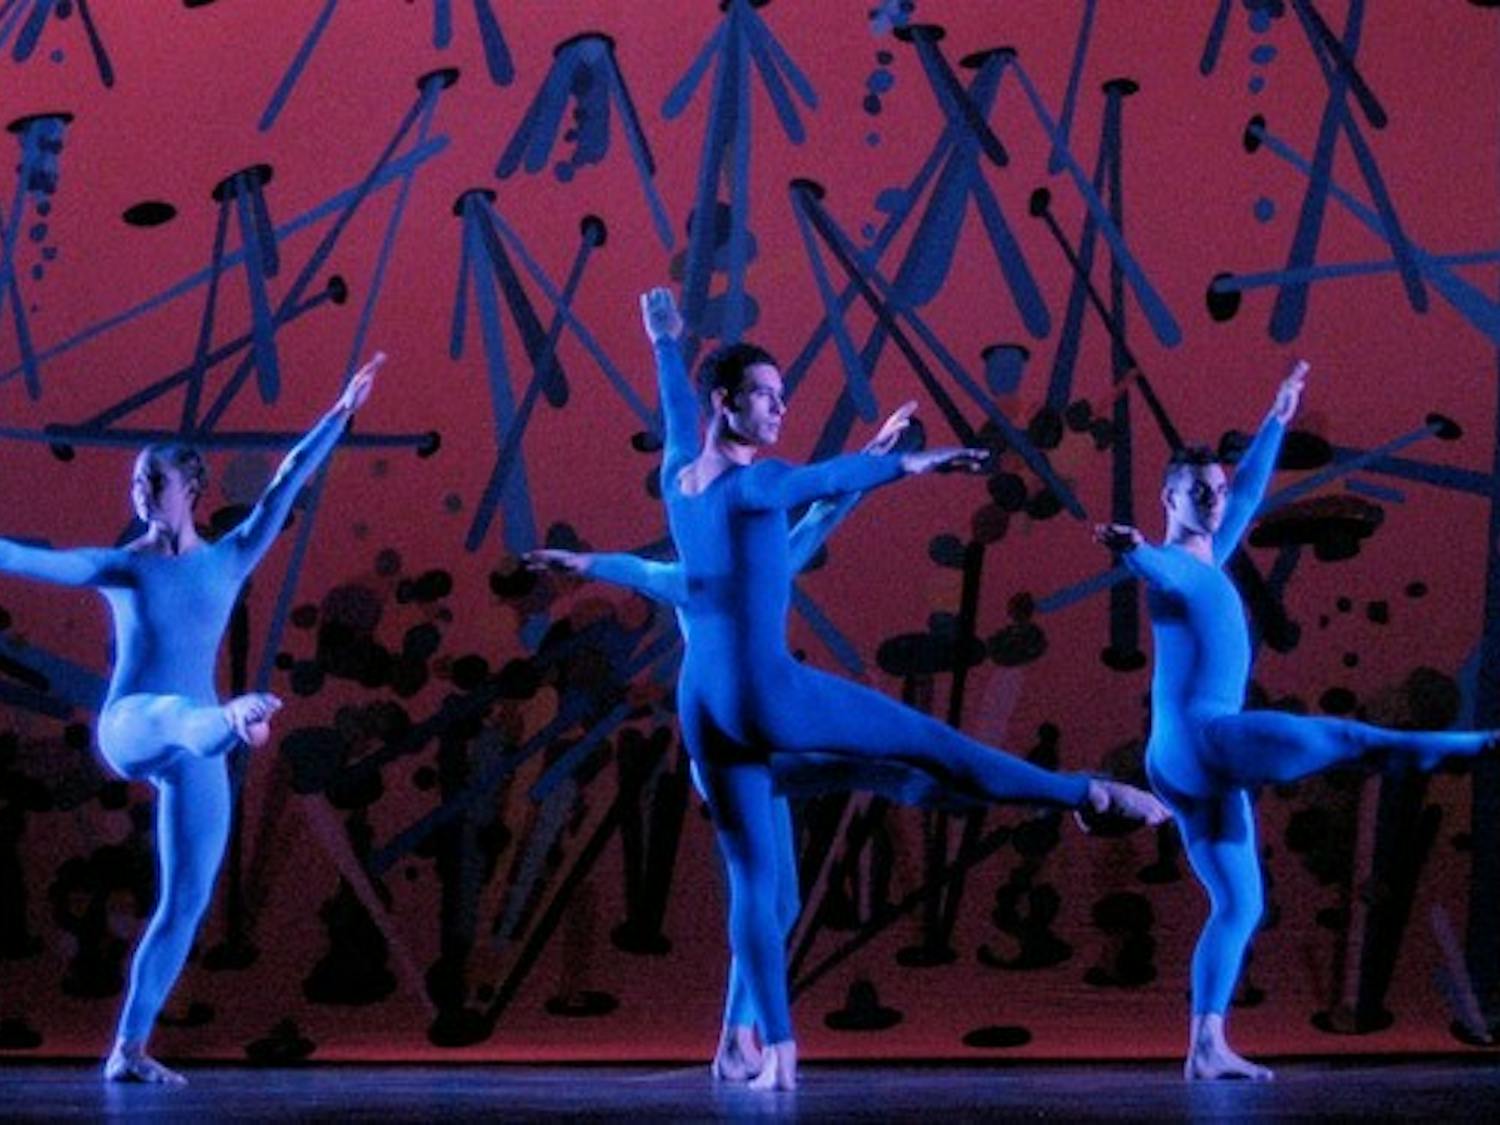 The commissioned Merce Cunningham piece was odd, but very original.